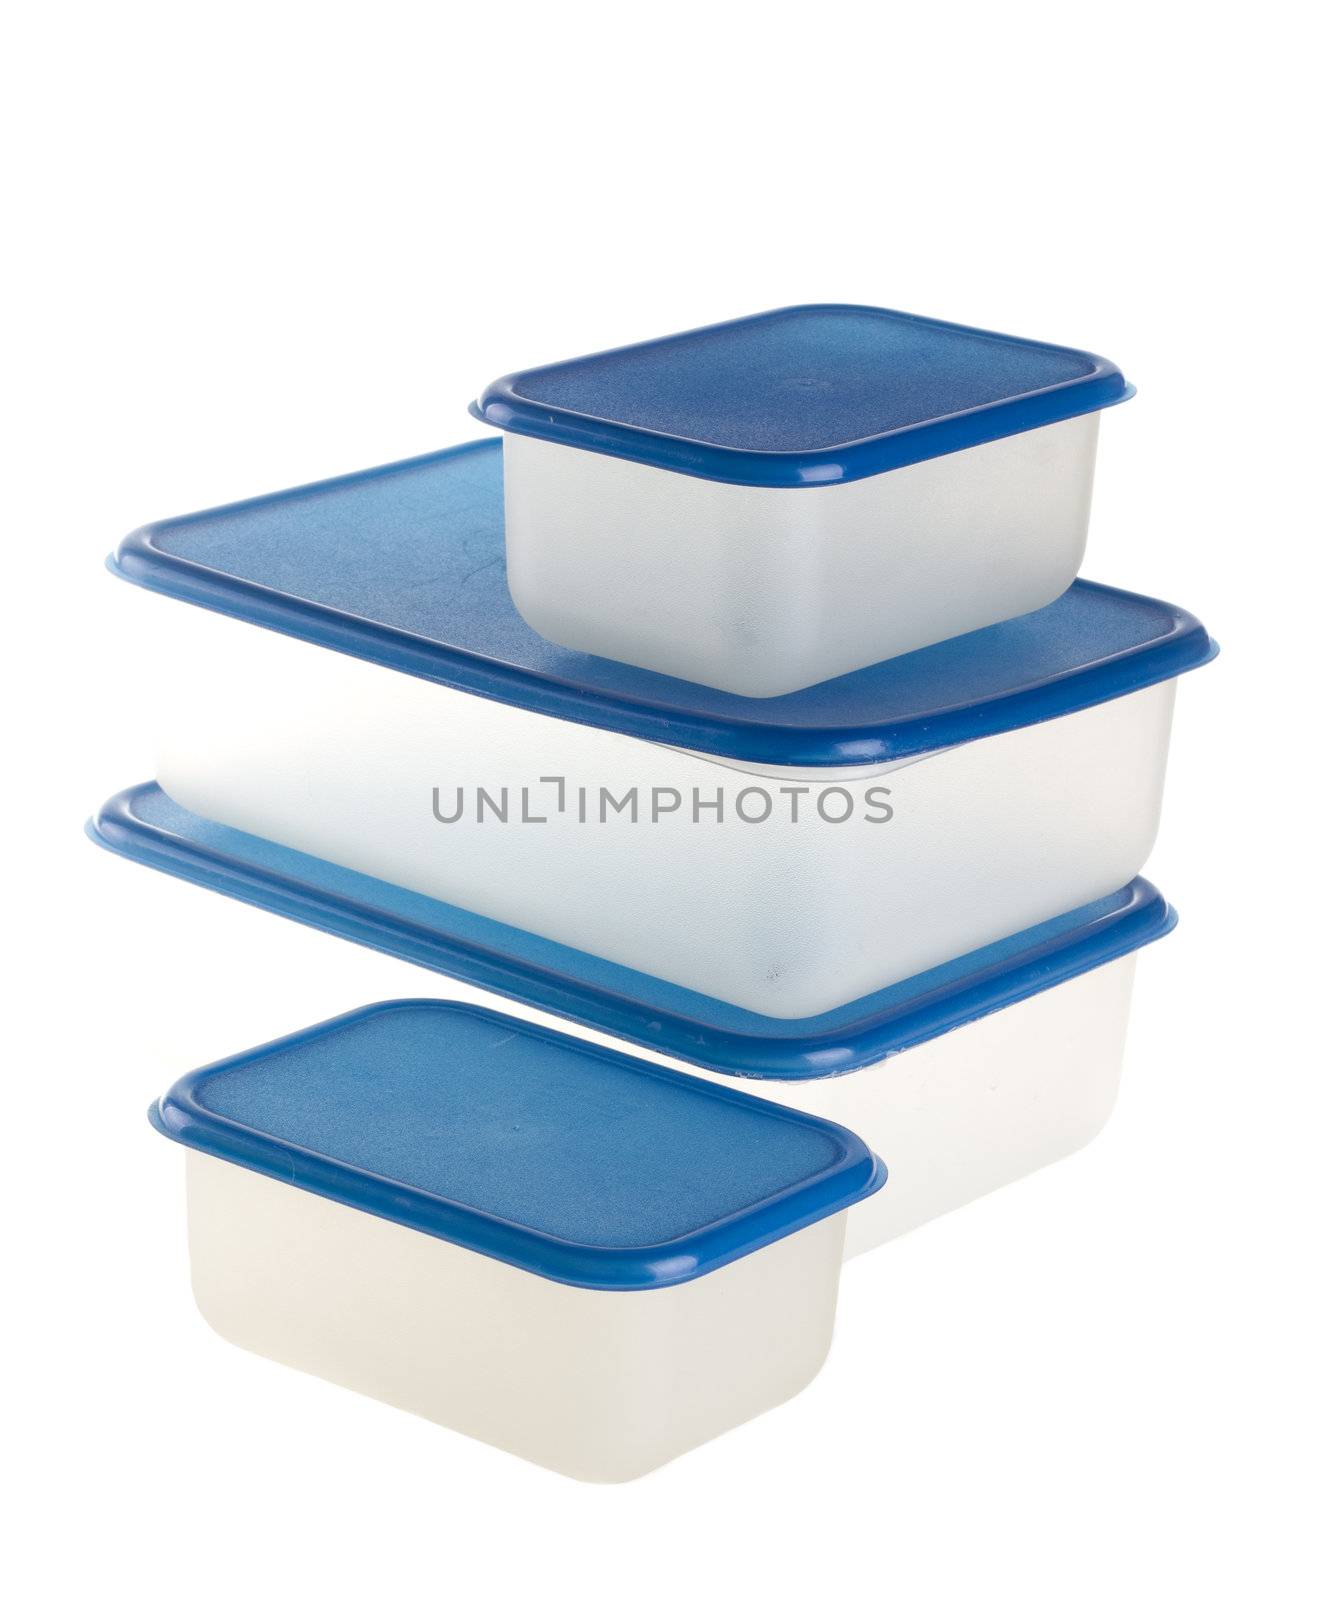 Plastic Containers by tehcheesiong